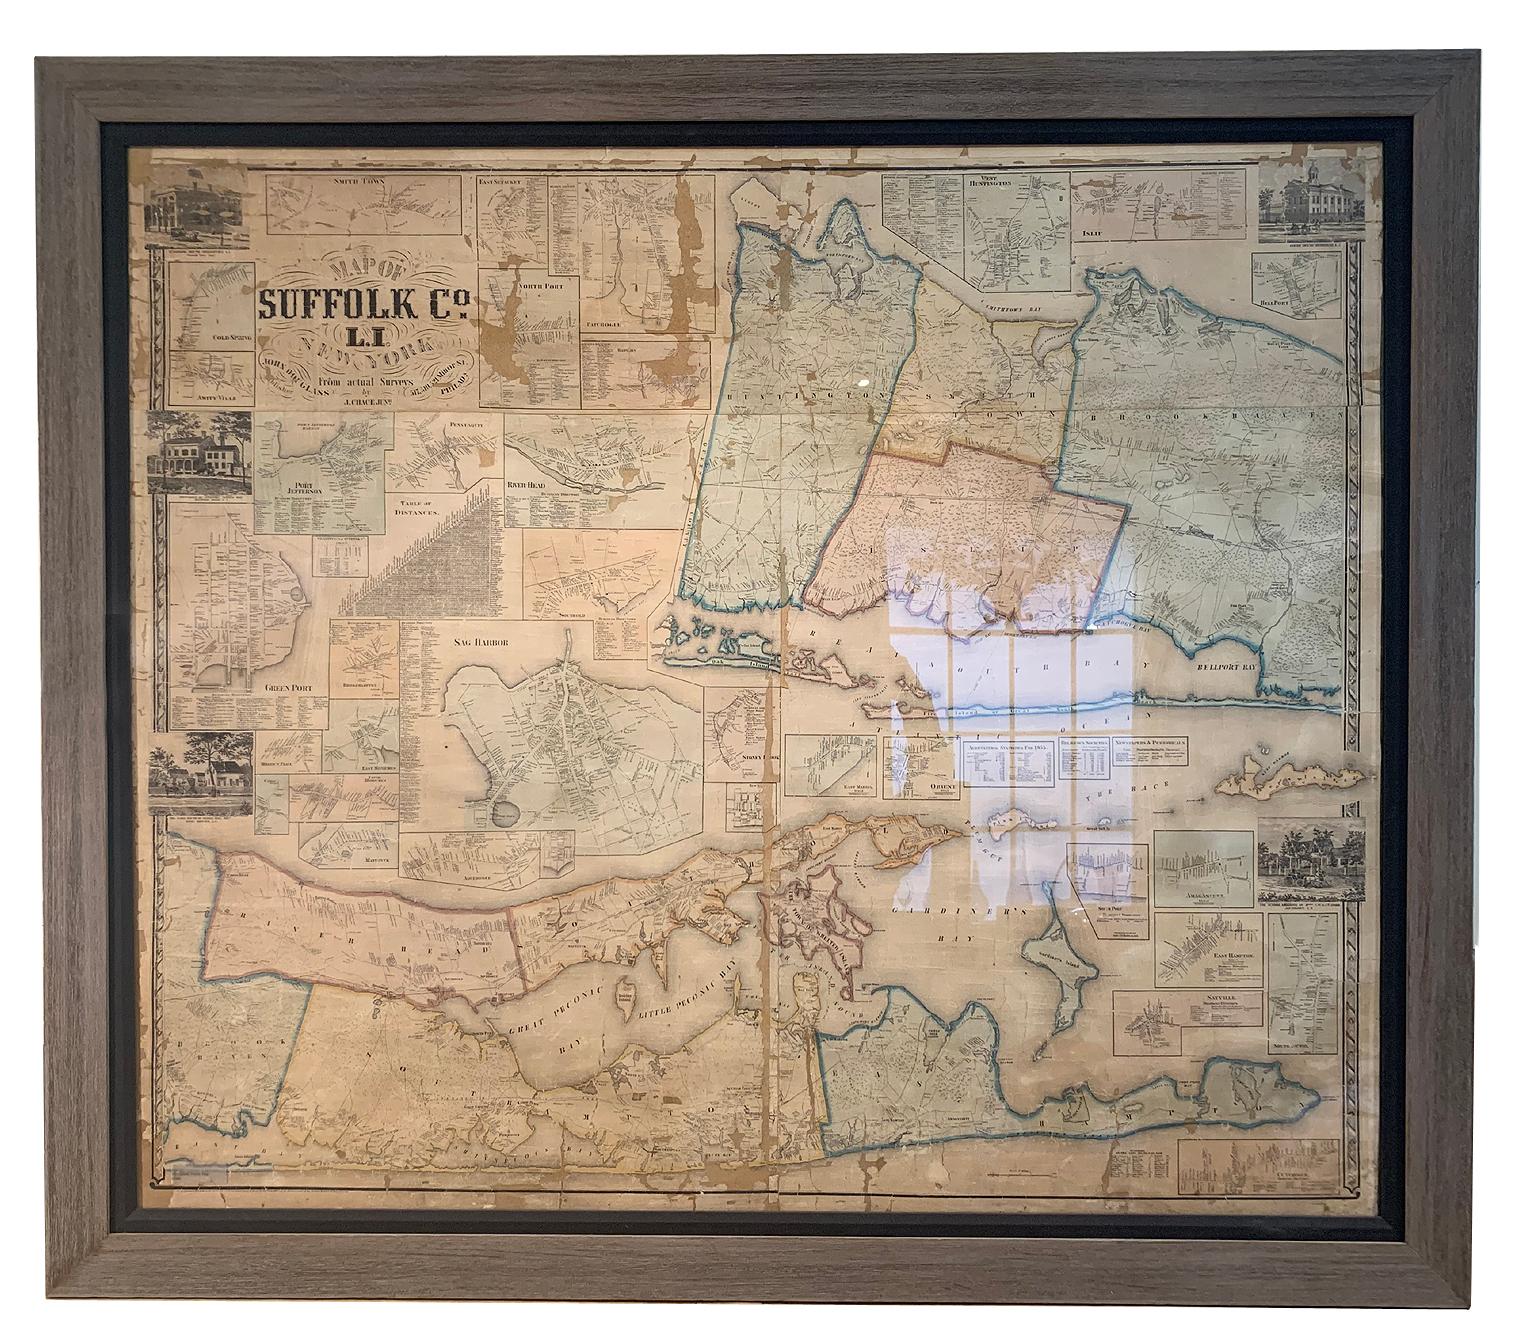 A Framed museum quality find. This large wall map dates to the mid-1800s. Detailed inset maps of, Sag Harbor, East Hampton, Amegansett, Shelter Island and most villages in Long Island. It also has agriculture stats for 1855. Detailed prints of homes